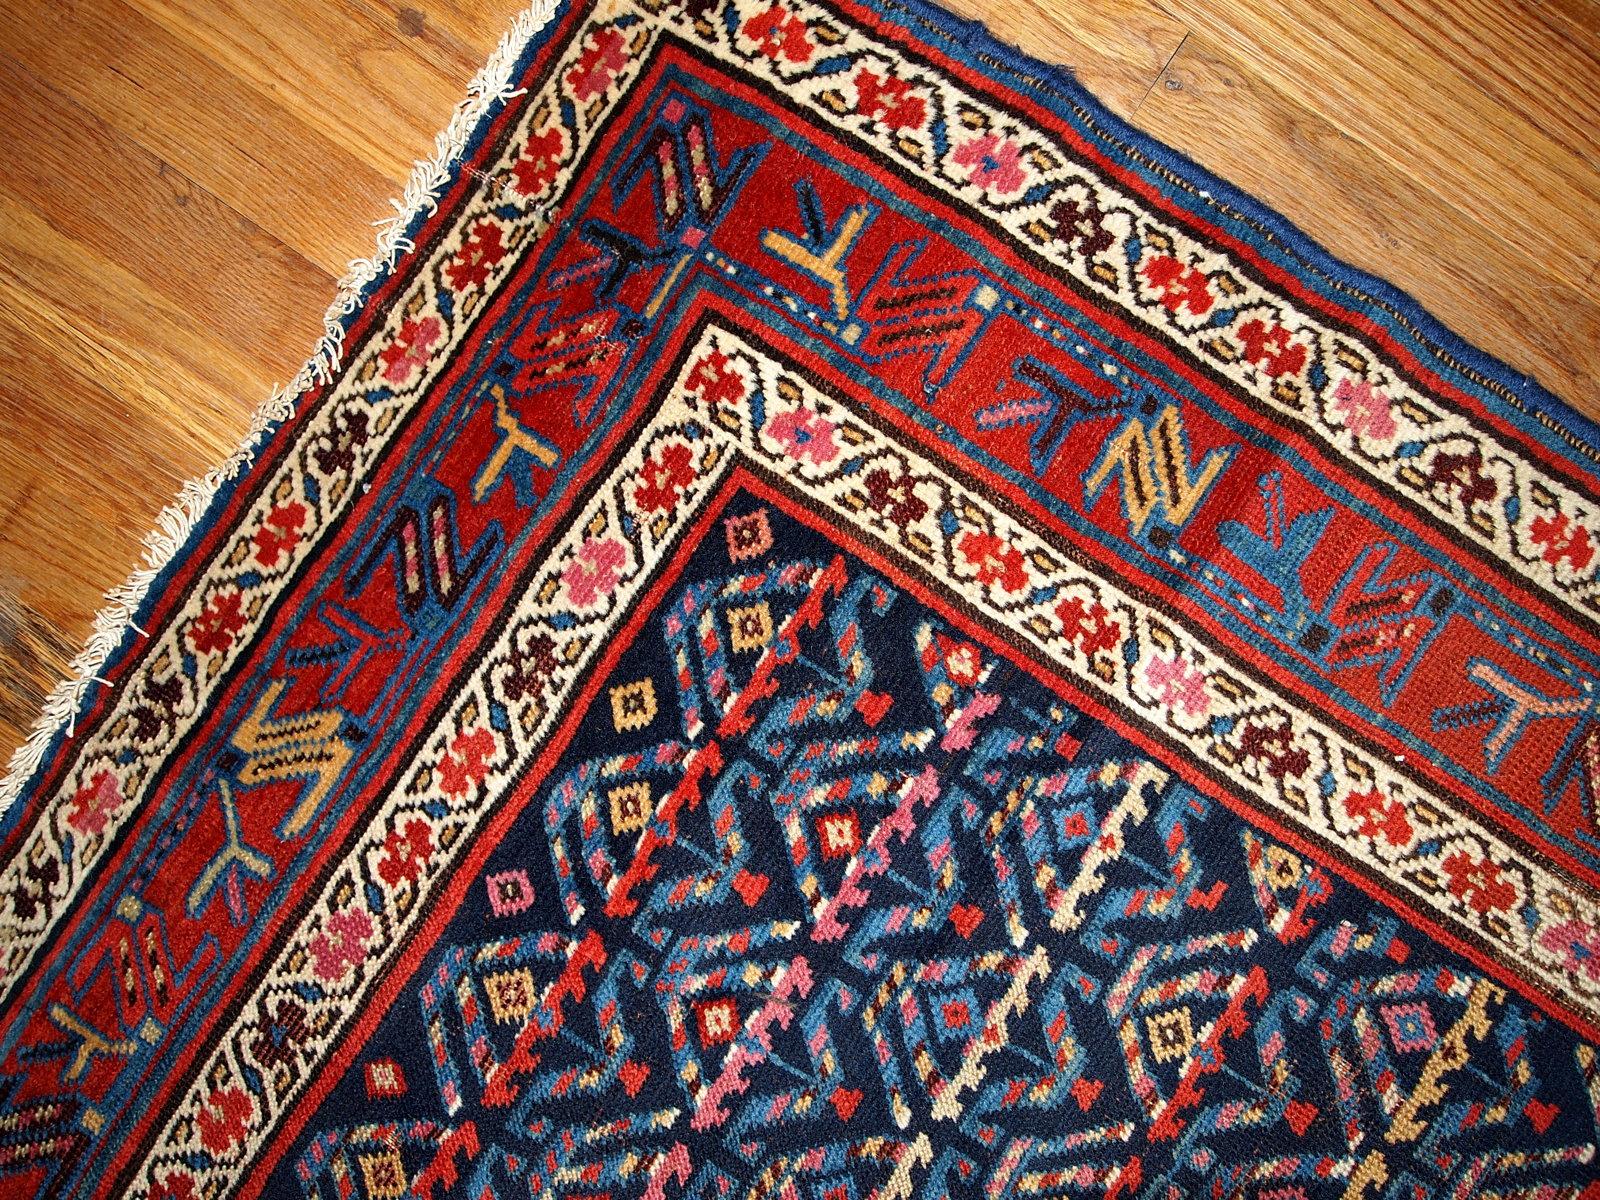 Antique hand made Kurdish style distressed runner 3.4'x12.3' (103cmx375cm) in dark blue shade. The rug has some age damages and a patch.